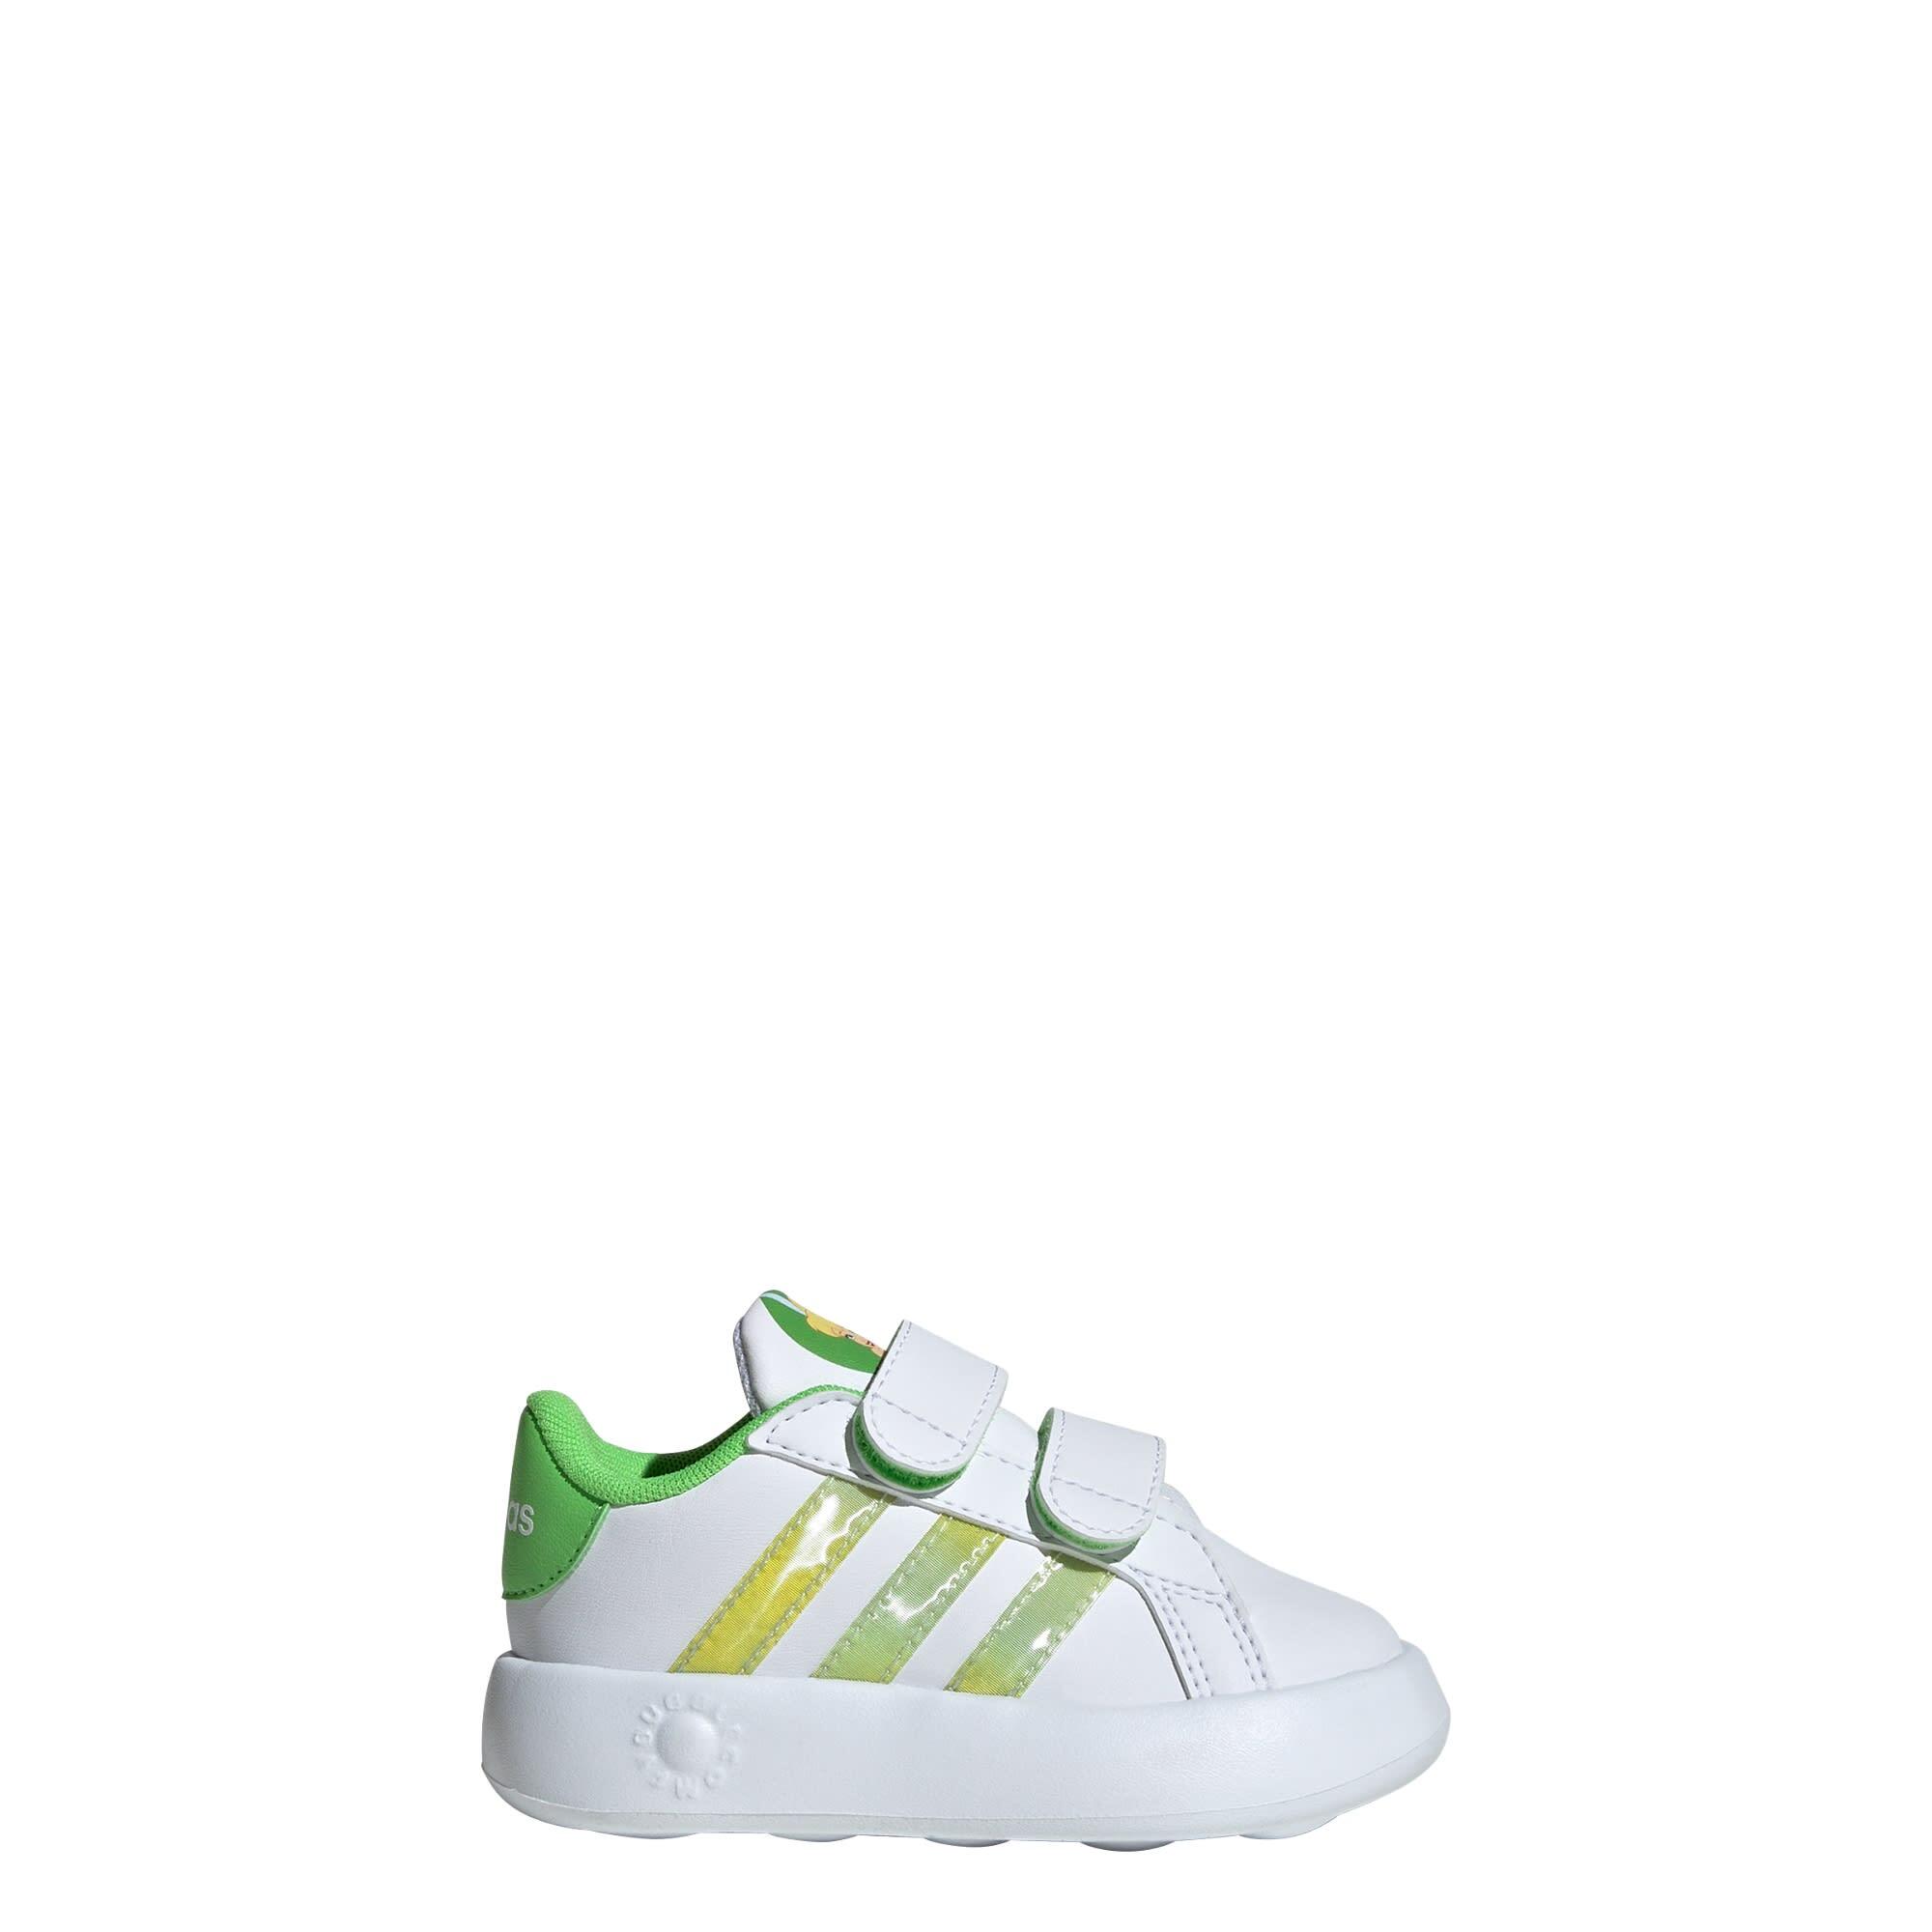 Grand Court 2.0 Tink Tennis Sportswear Shoes 1/7